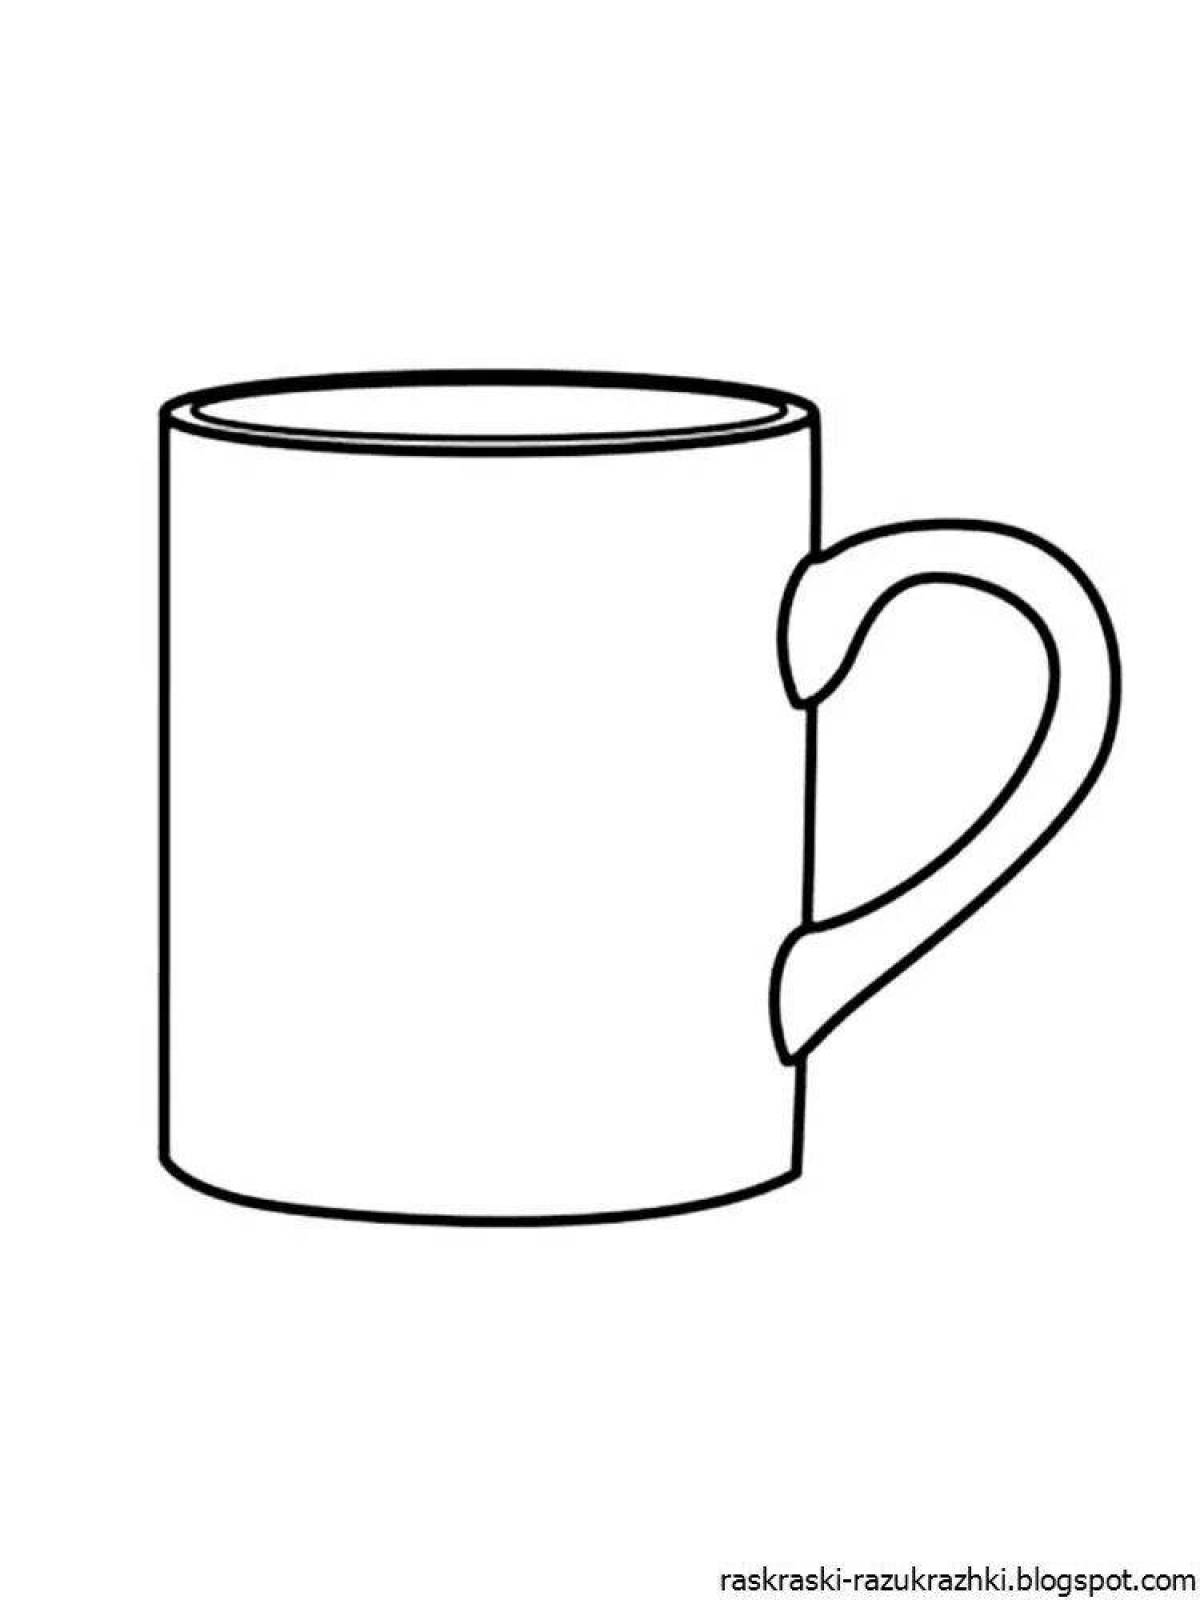 Cup picture for kids #3